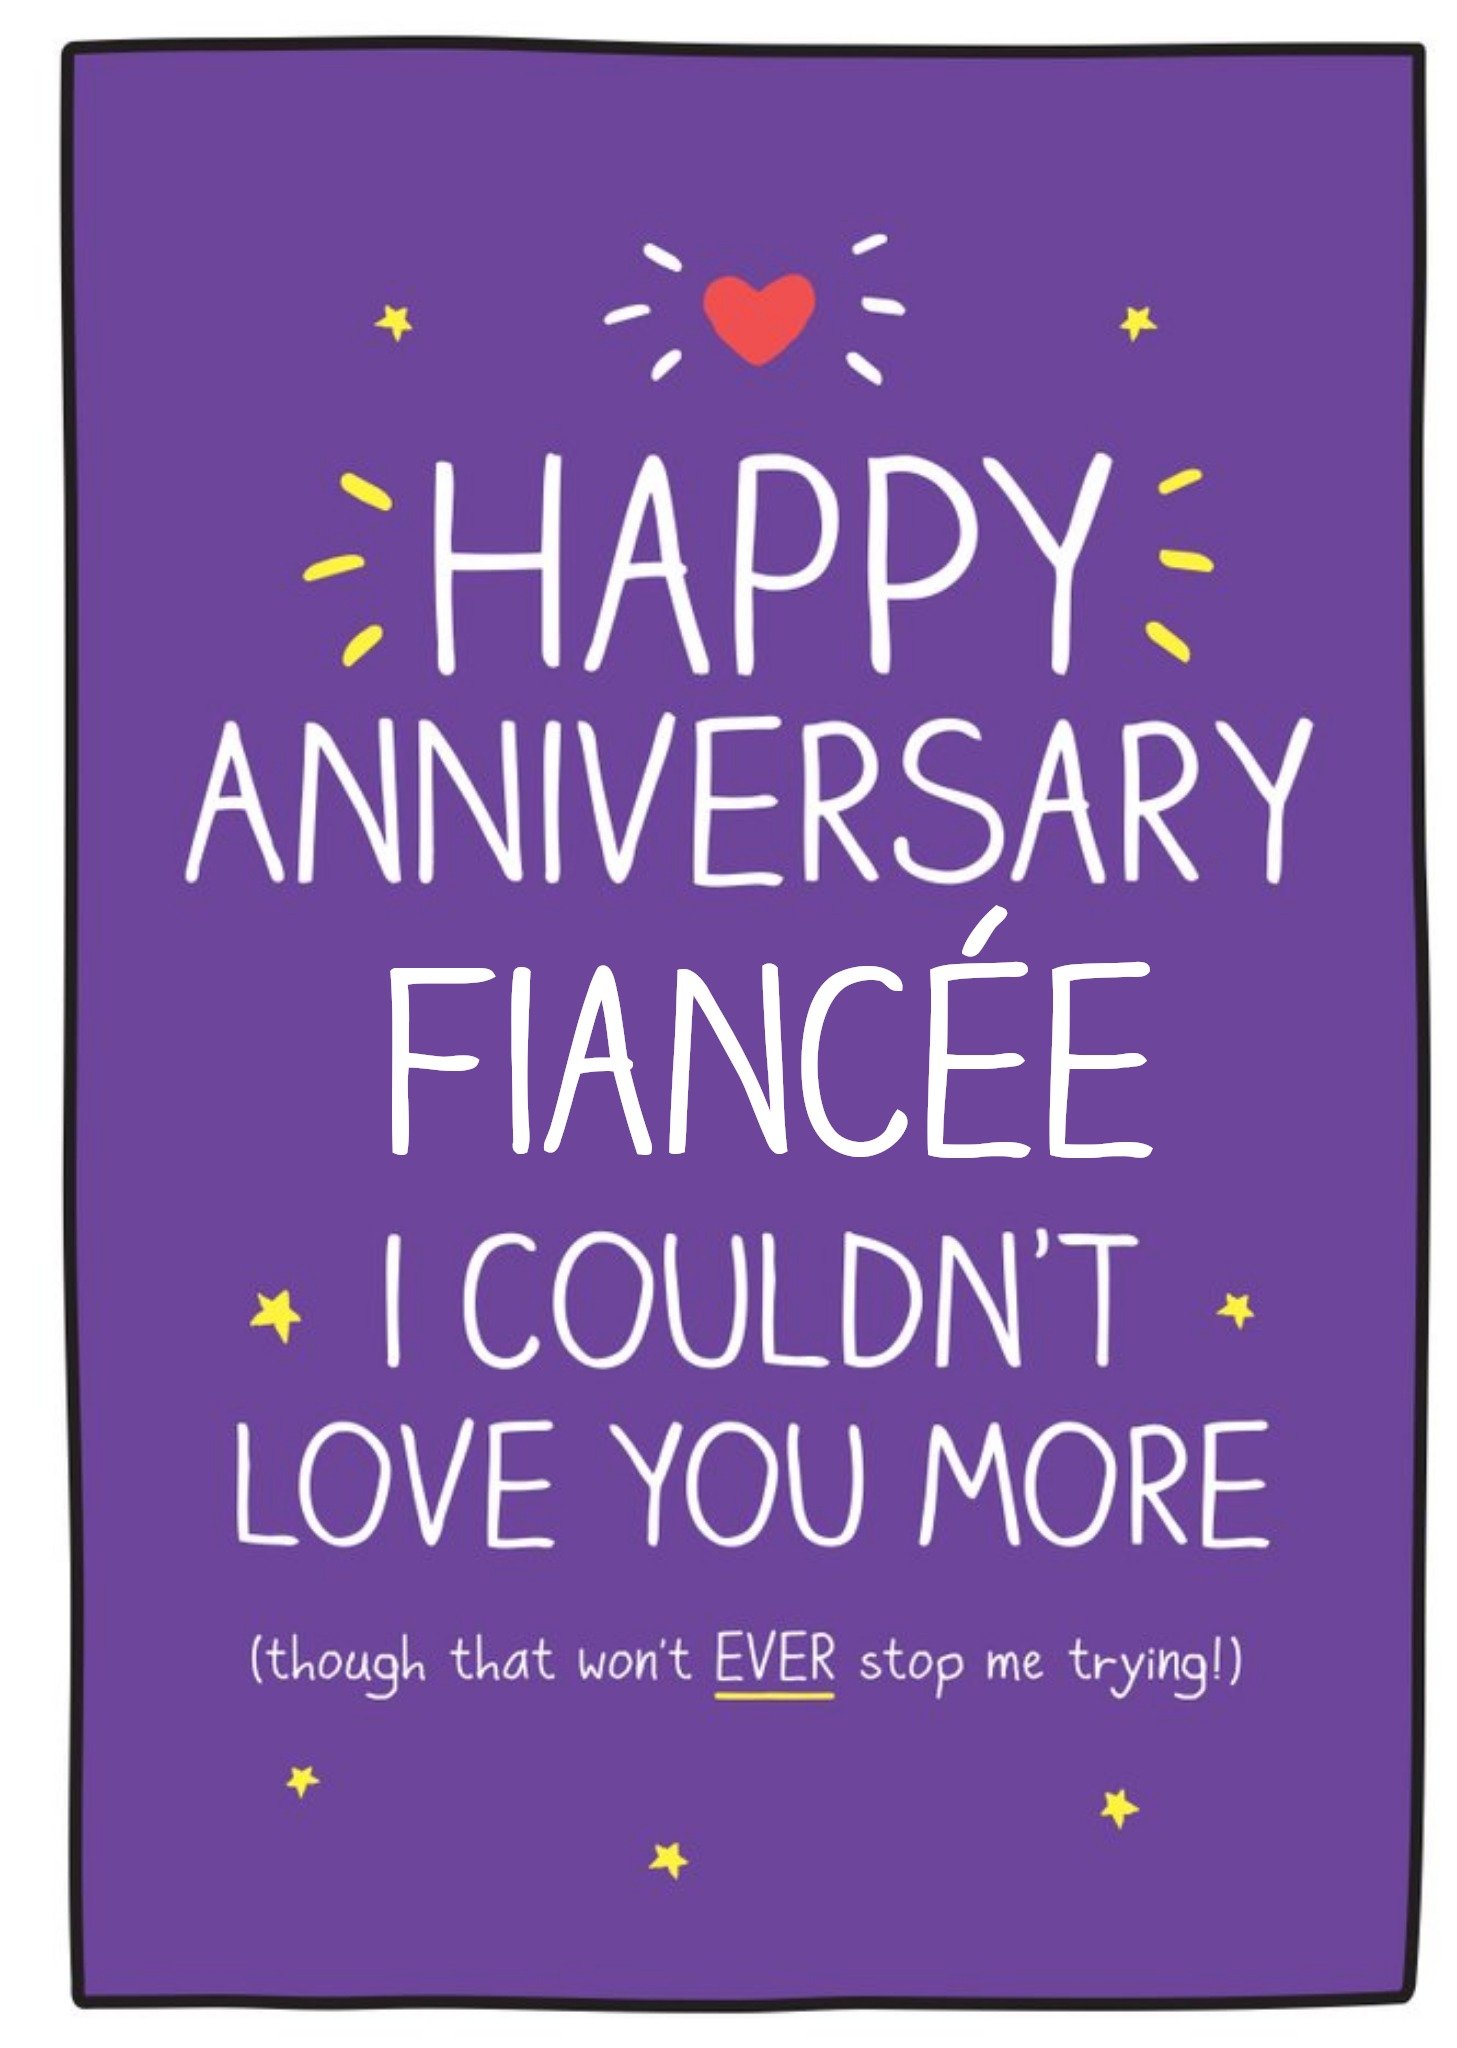 Happy Jackson Anniversary Card - Happy Anniversary Finacee, I Couldn't Love You More, Large